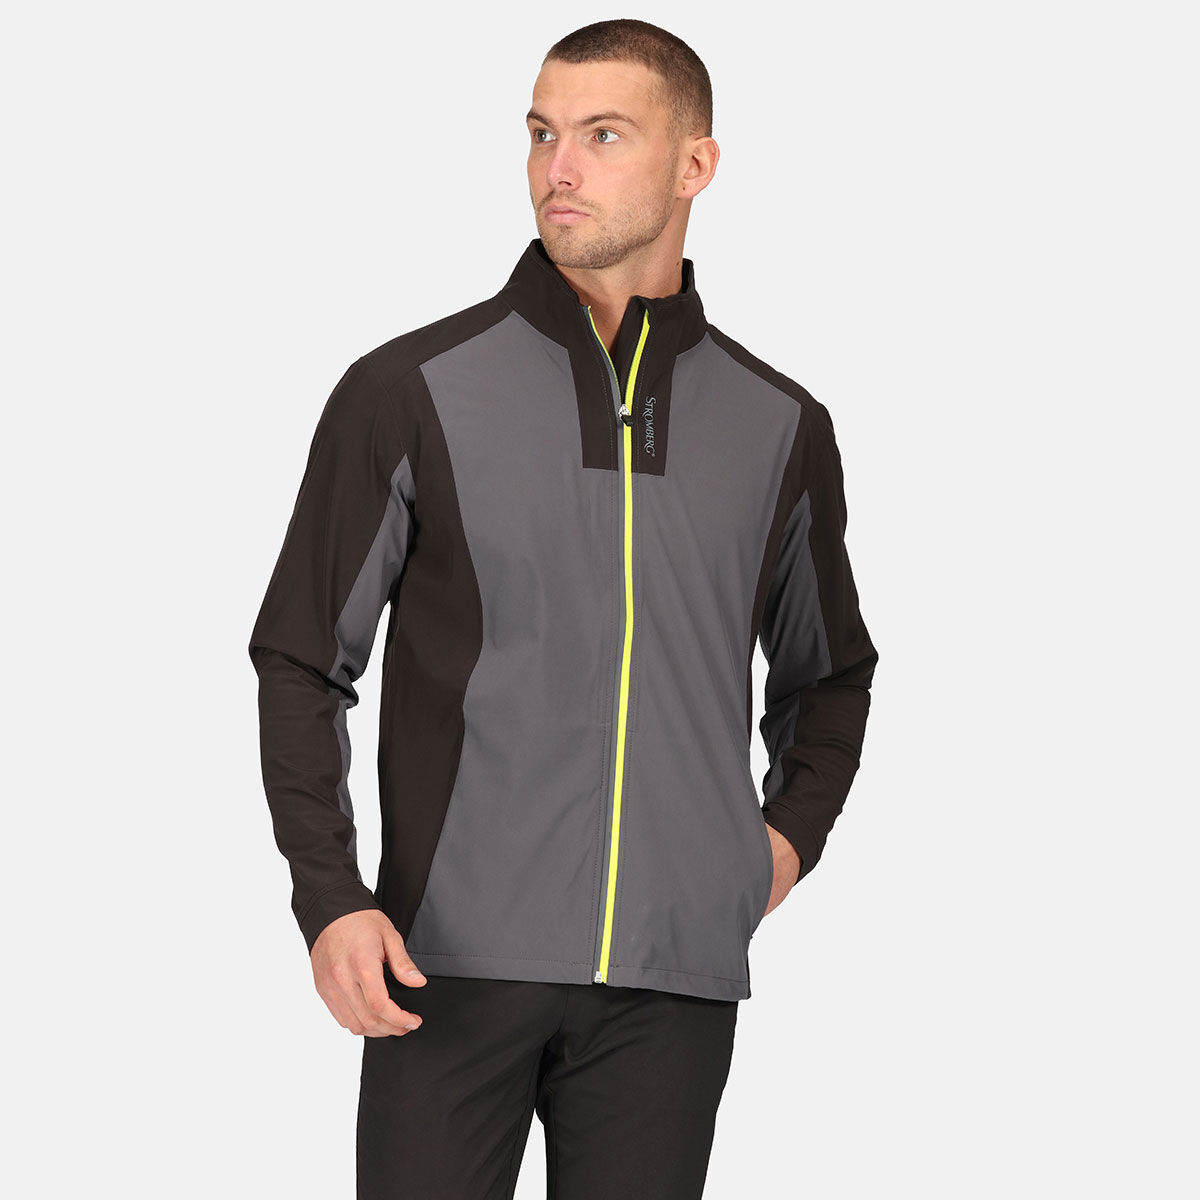 Stromberg Black and Grey Lightweight Colour Block Weather Tech Waterproof Golf Jacket, Size: Small | American Golf - Father's Day Gift von Stromberg